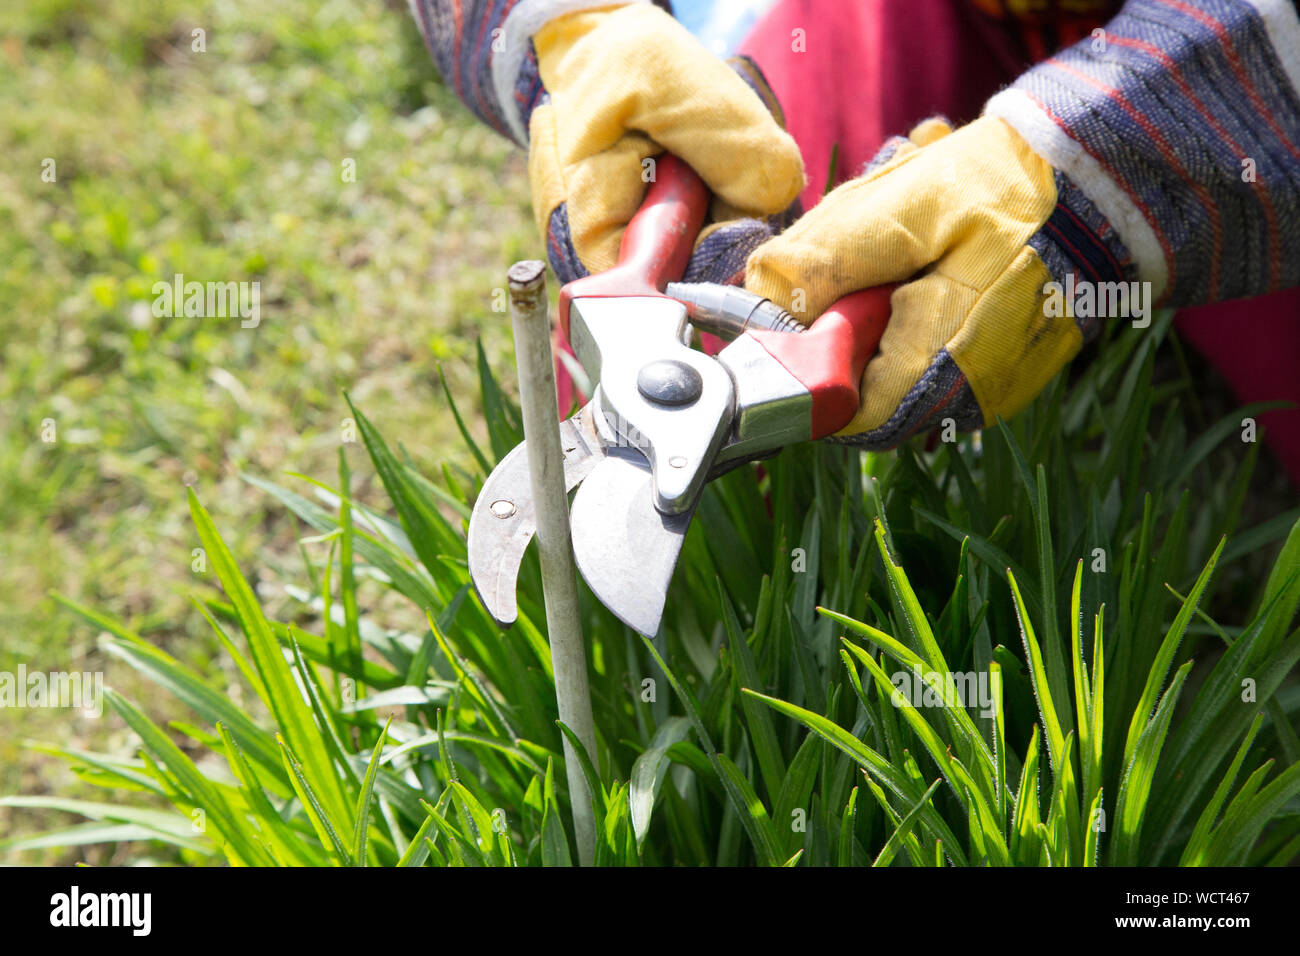 Midsection Of Farmer Cutting Grass Stock Photo